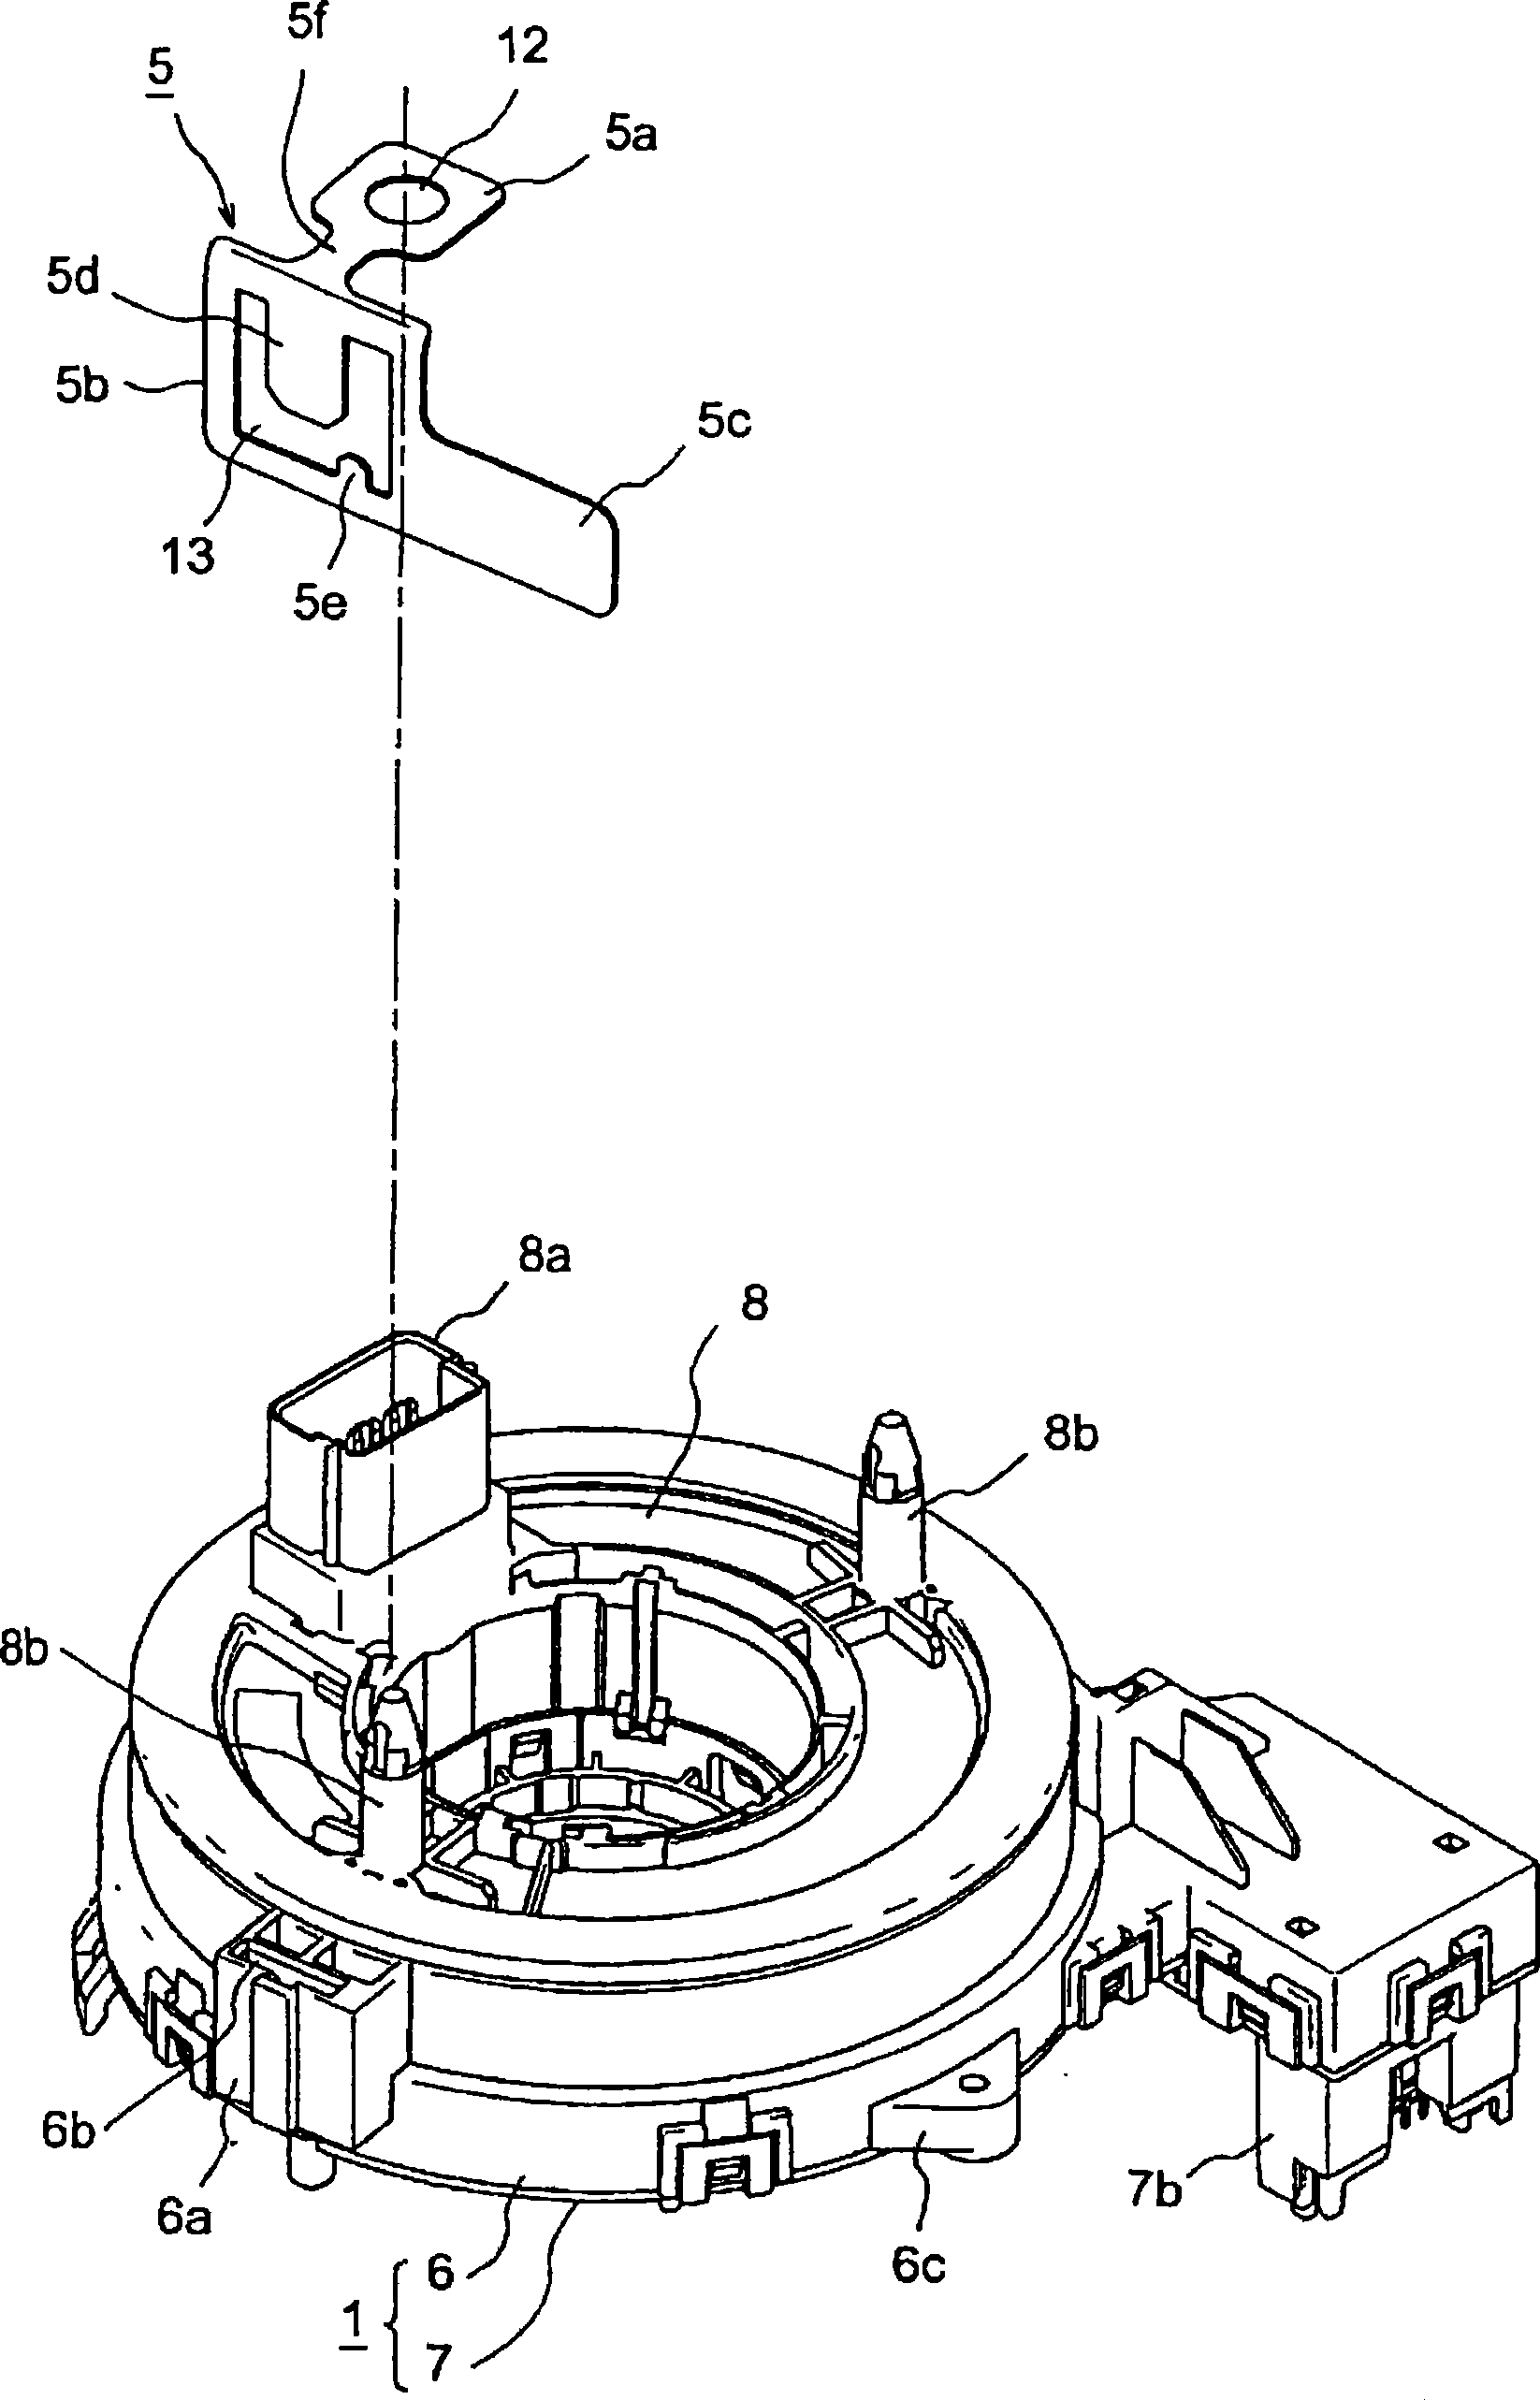 Rotary connector